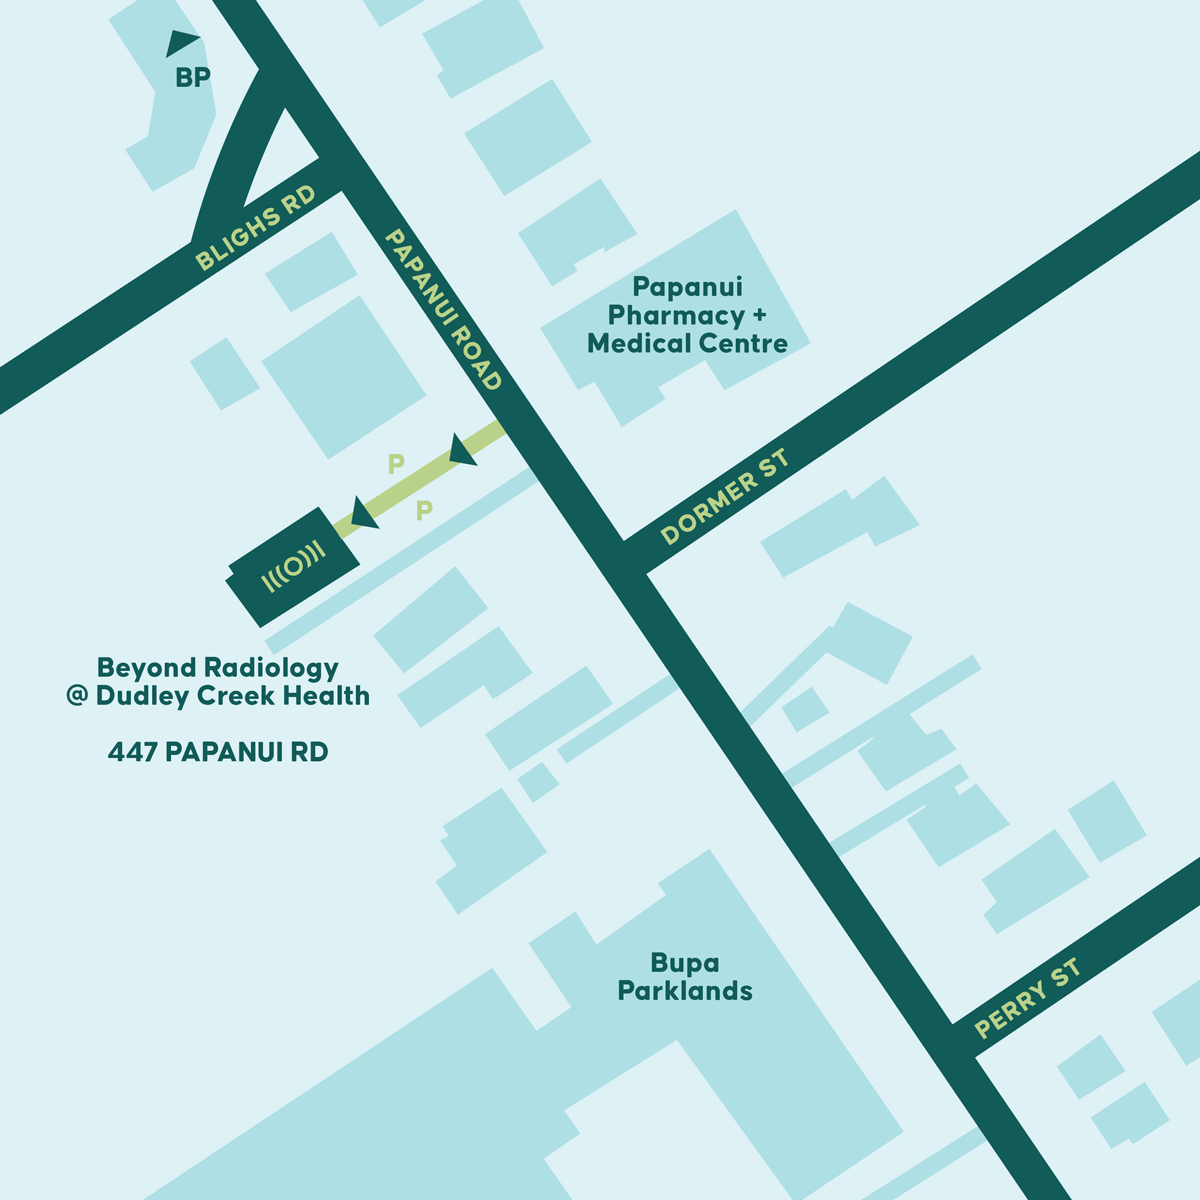 Map showing the location of Dudley Creek Health